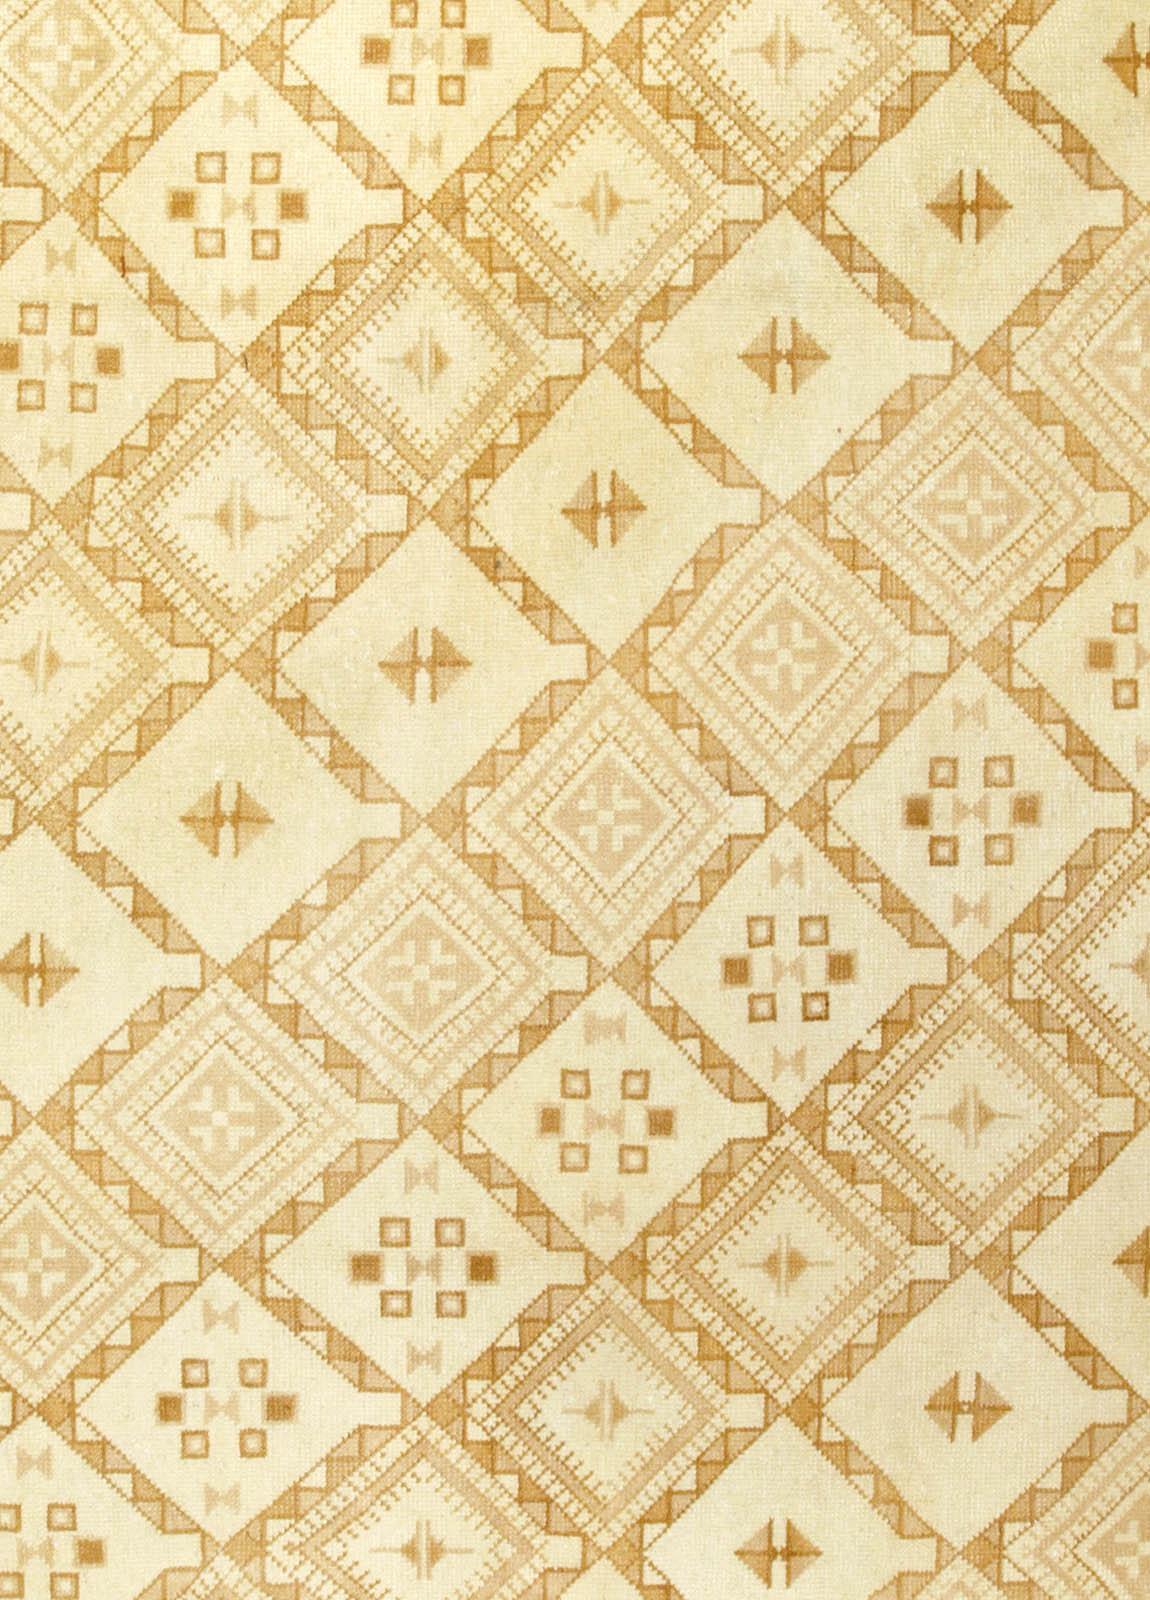 Vintage Moroccan beige hand knotted wool rug
This striking vintage Moroccan carpet features an all-over latticed field in shades of yellow, beige and brown. The intricate geometric shapes detailing the outlines of the lattice create somewhat of an